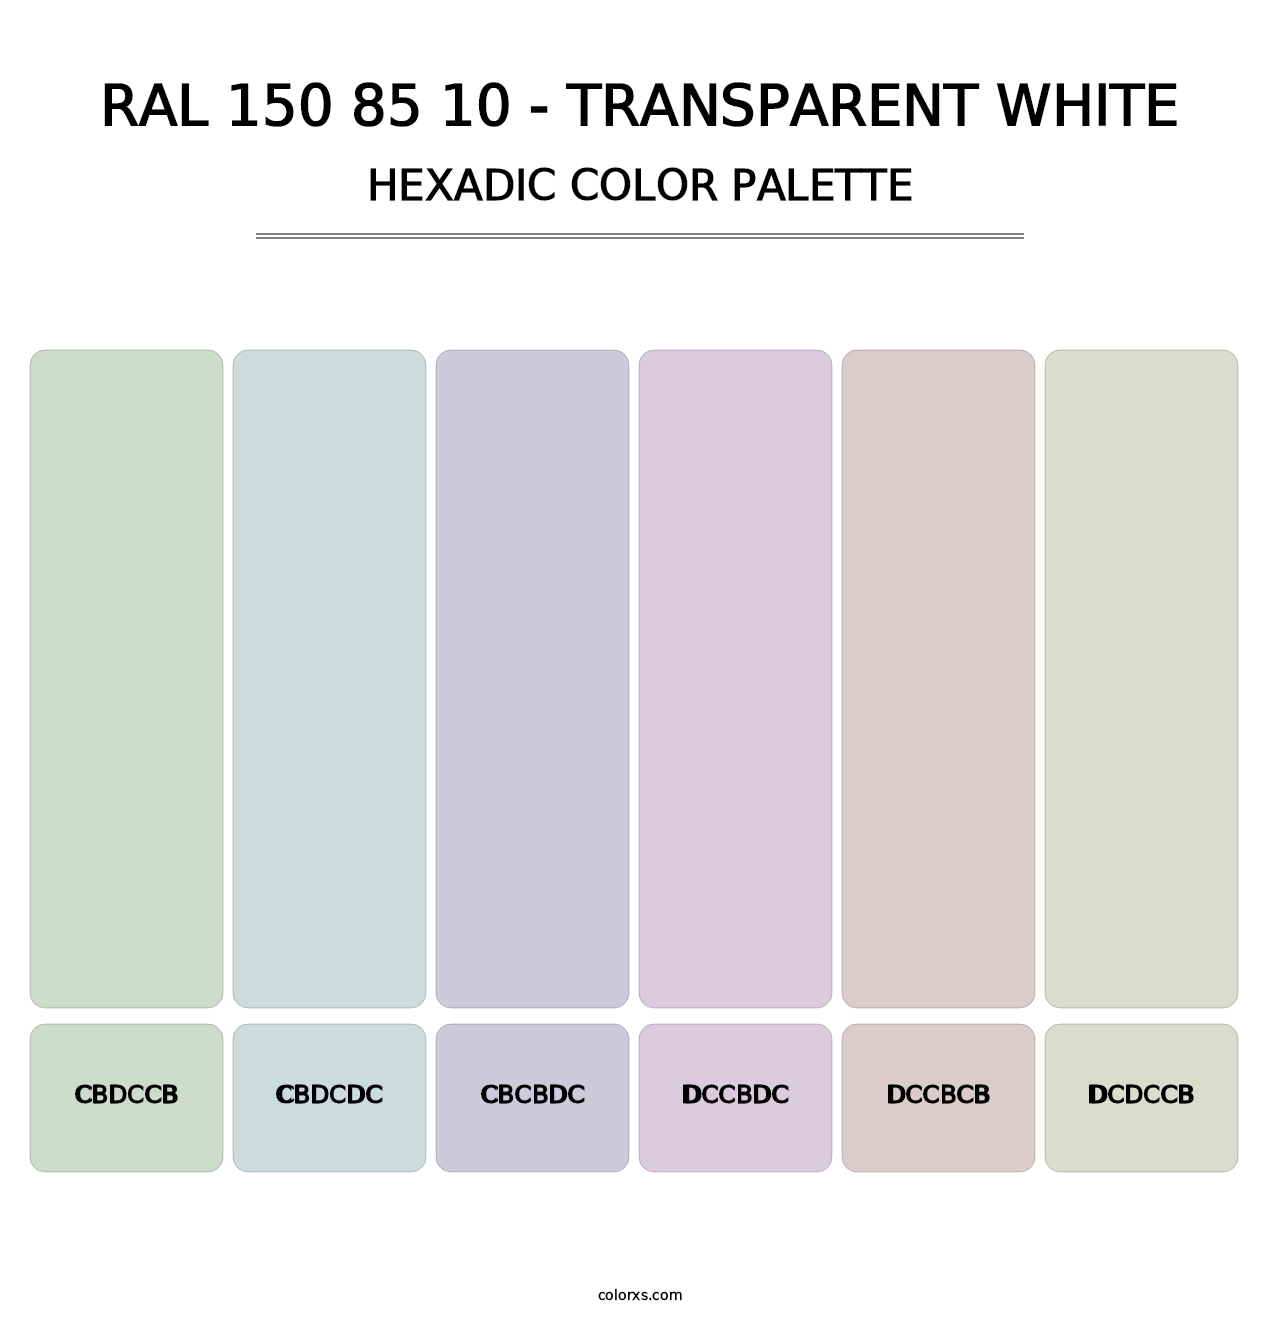 RAL 150 85 10 - Transparent White - Hexadic Color Palette